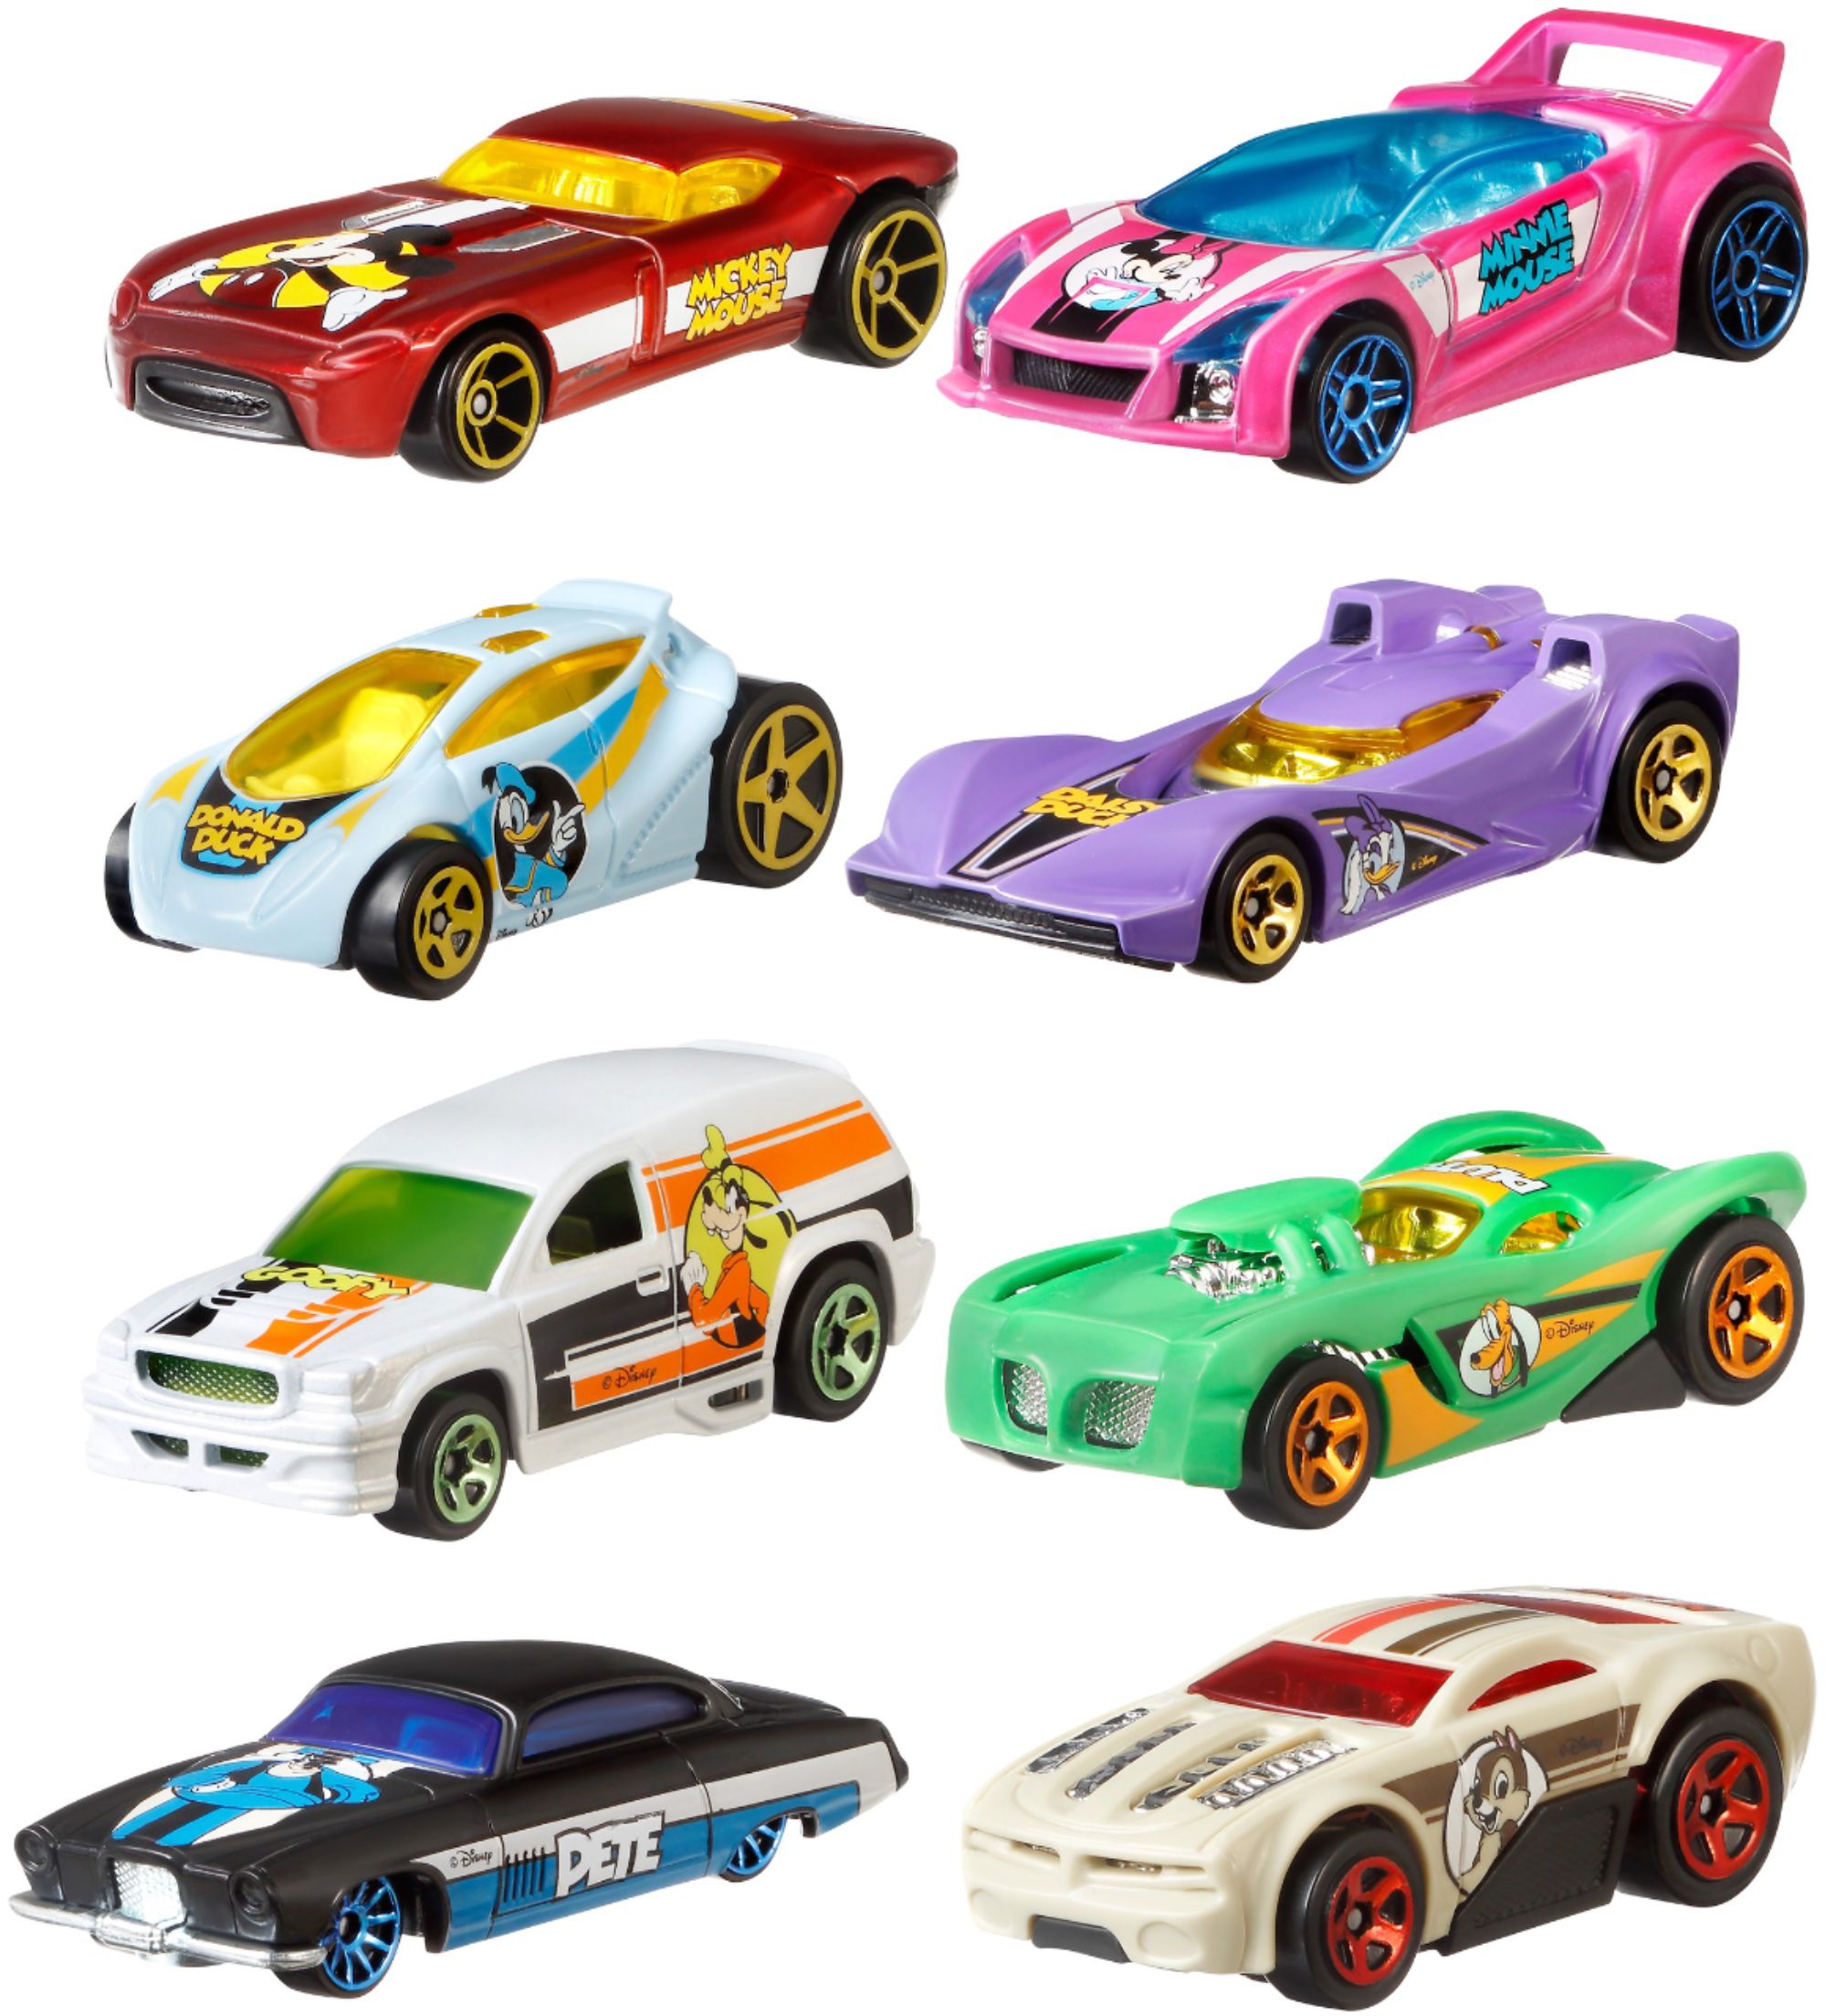 mickey mouse hot wheels cars